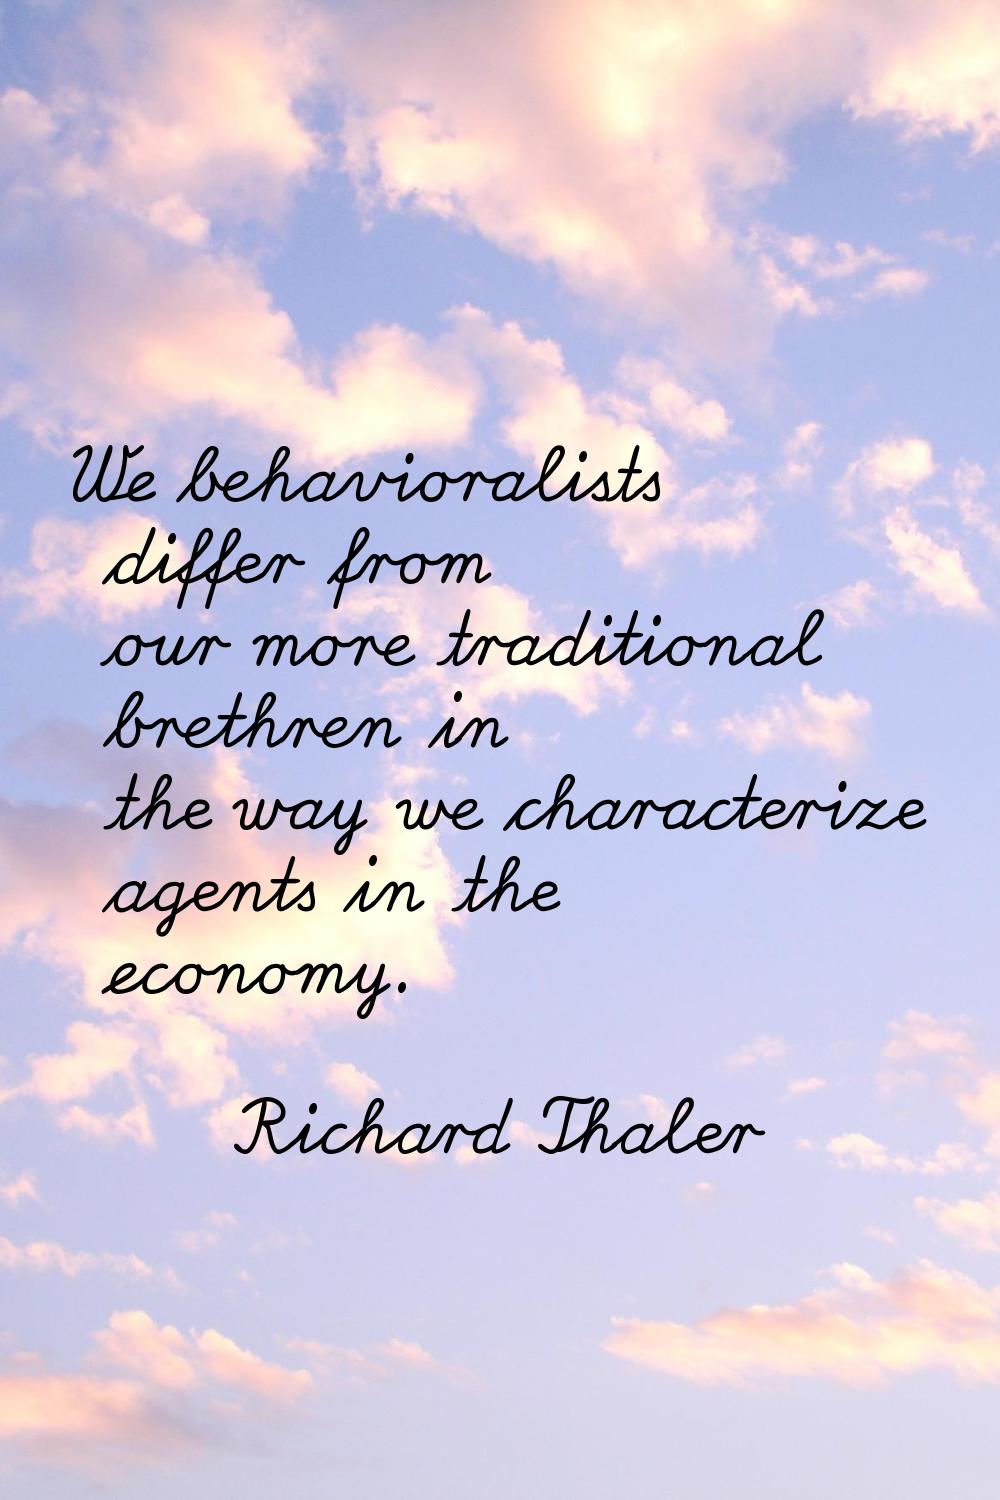 We behavioralists differ from our more traditional brethren in the way we characterize agents in th